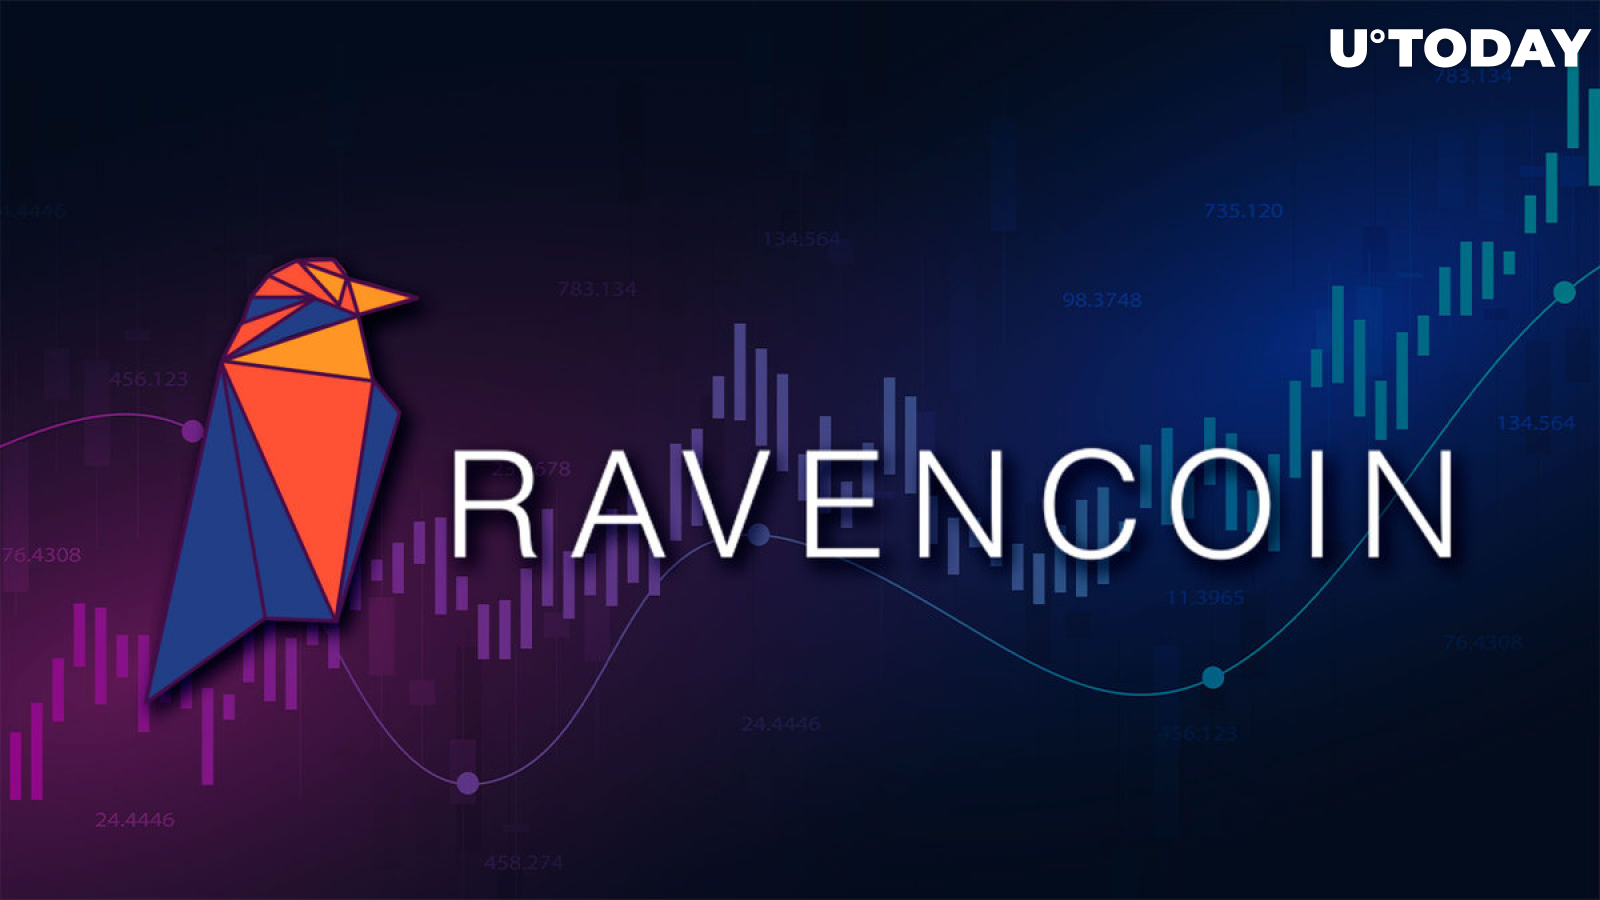 Ravencoin (RVN) Makes Enormous 50% Return, Here Are 3 Reasons Why